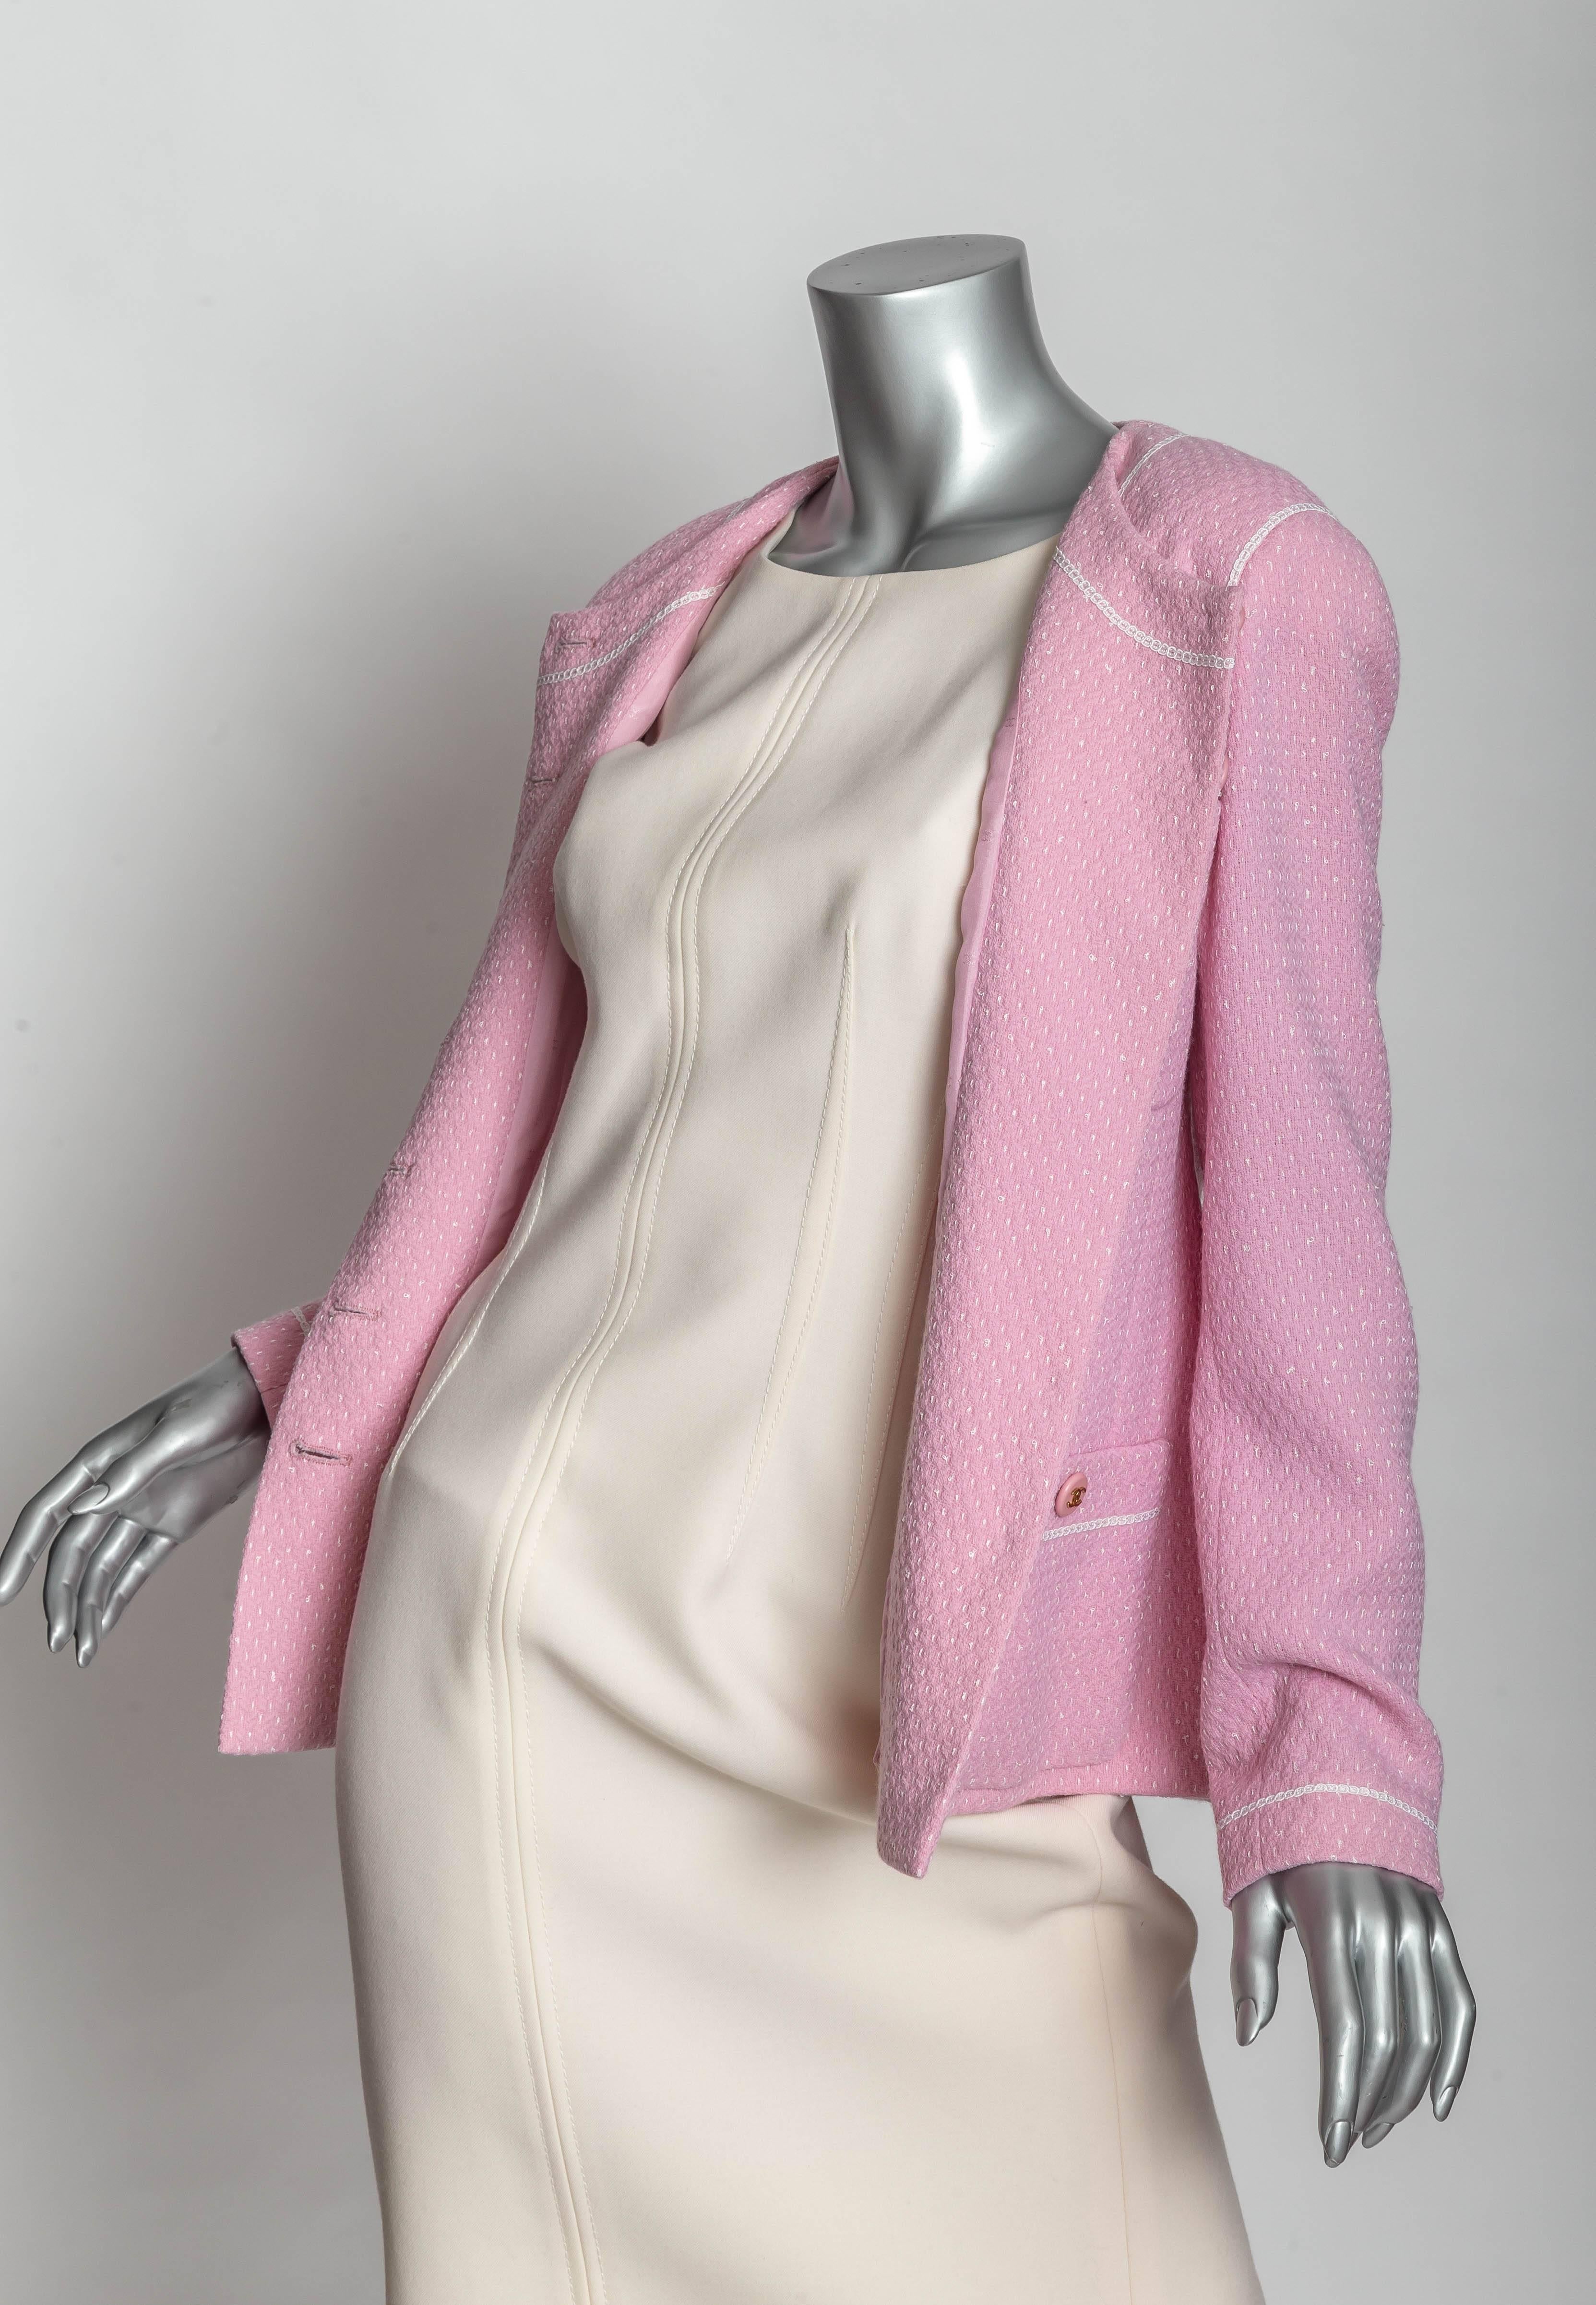 Chanel Jacket in Pink with Chanel Logo Buttons - 42 3